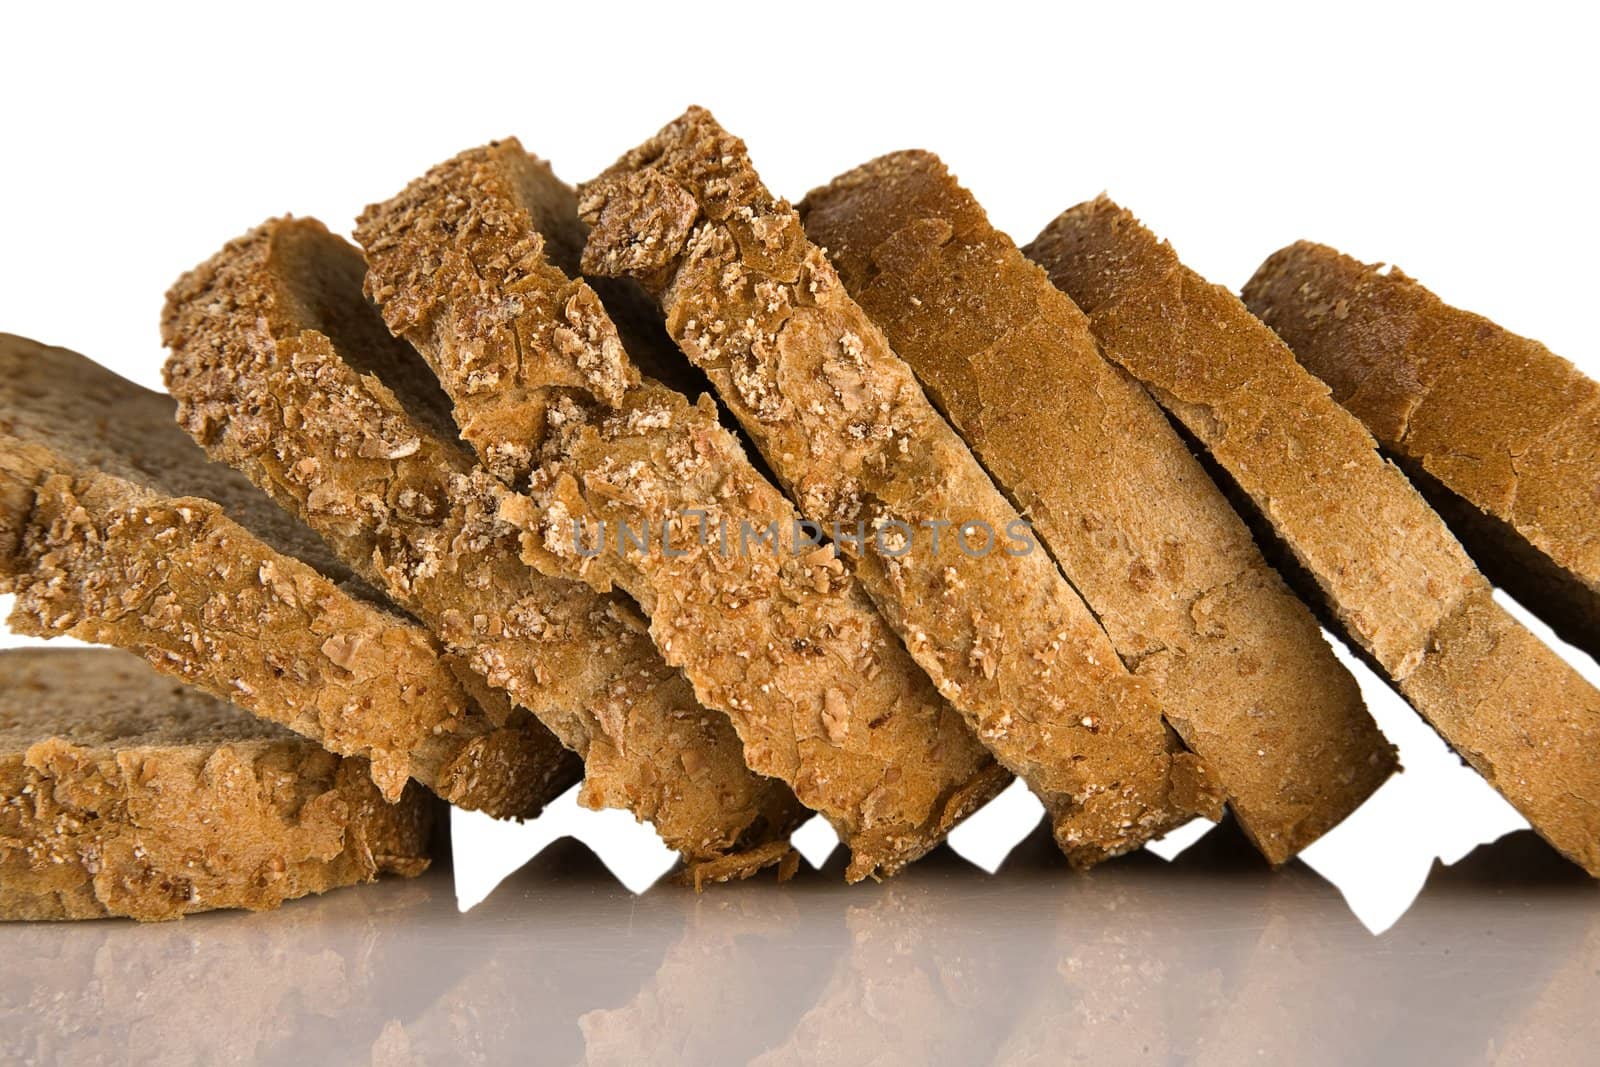 Sliced brown bread Isolated on a white background, healthy food concept